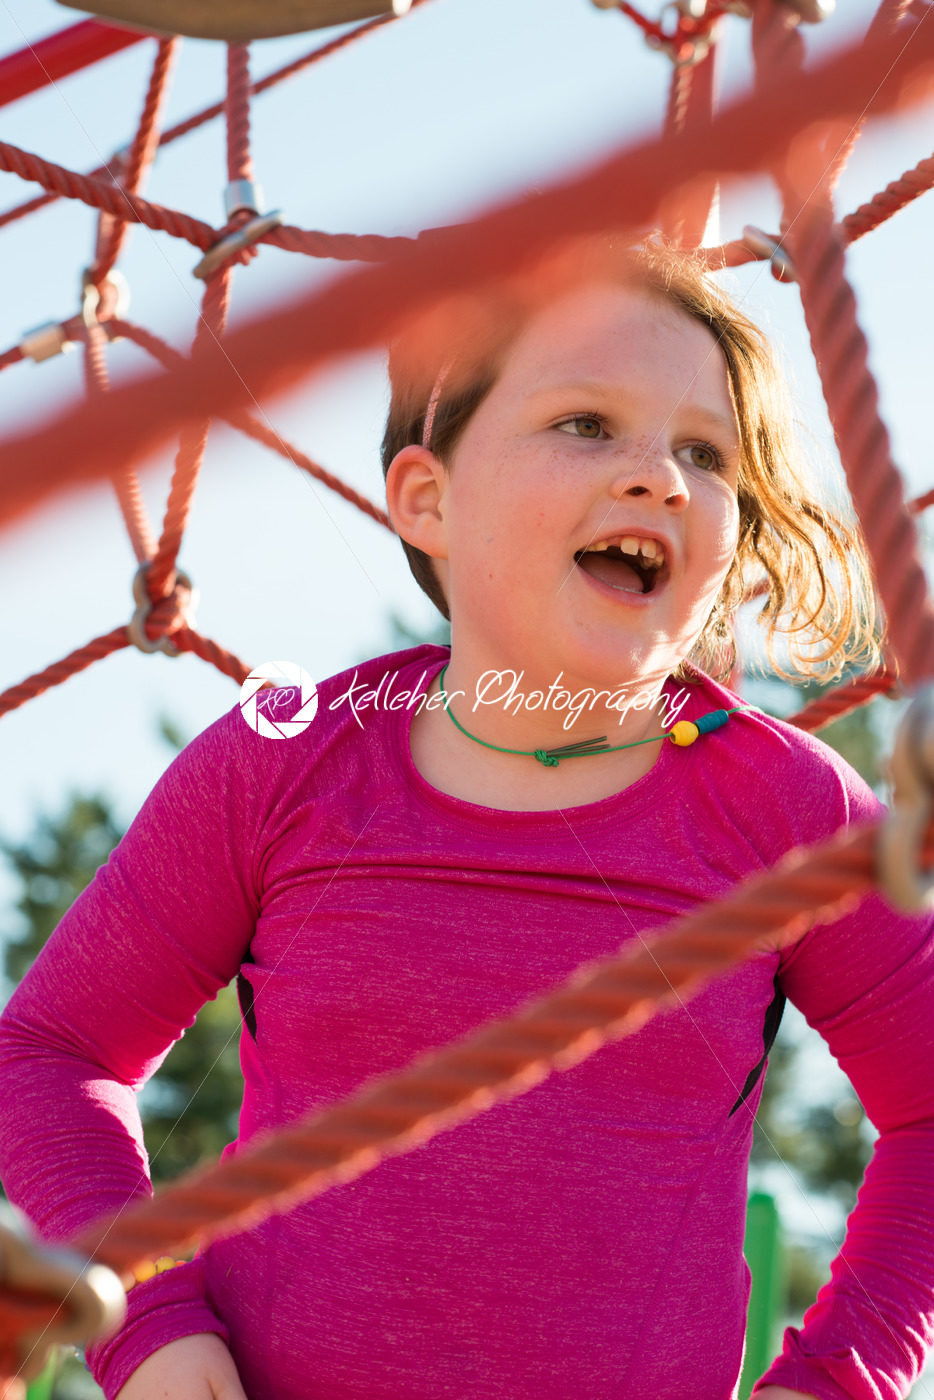 Young girl child playing at outdoor playground climbing net - Kelleher Photography Store